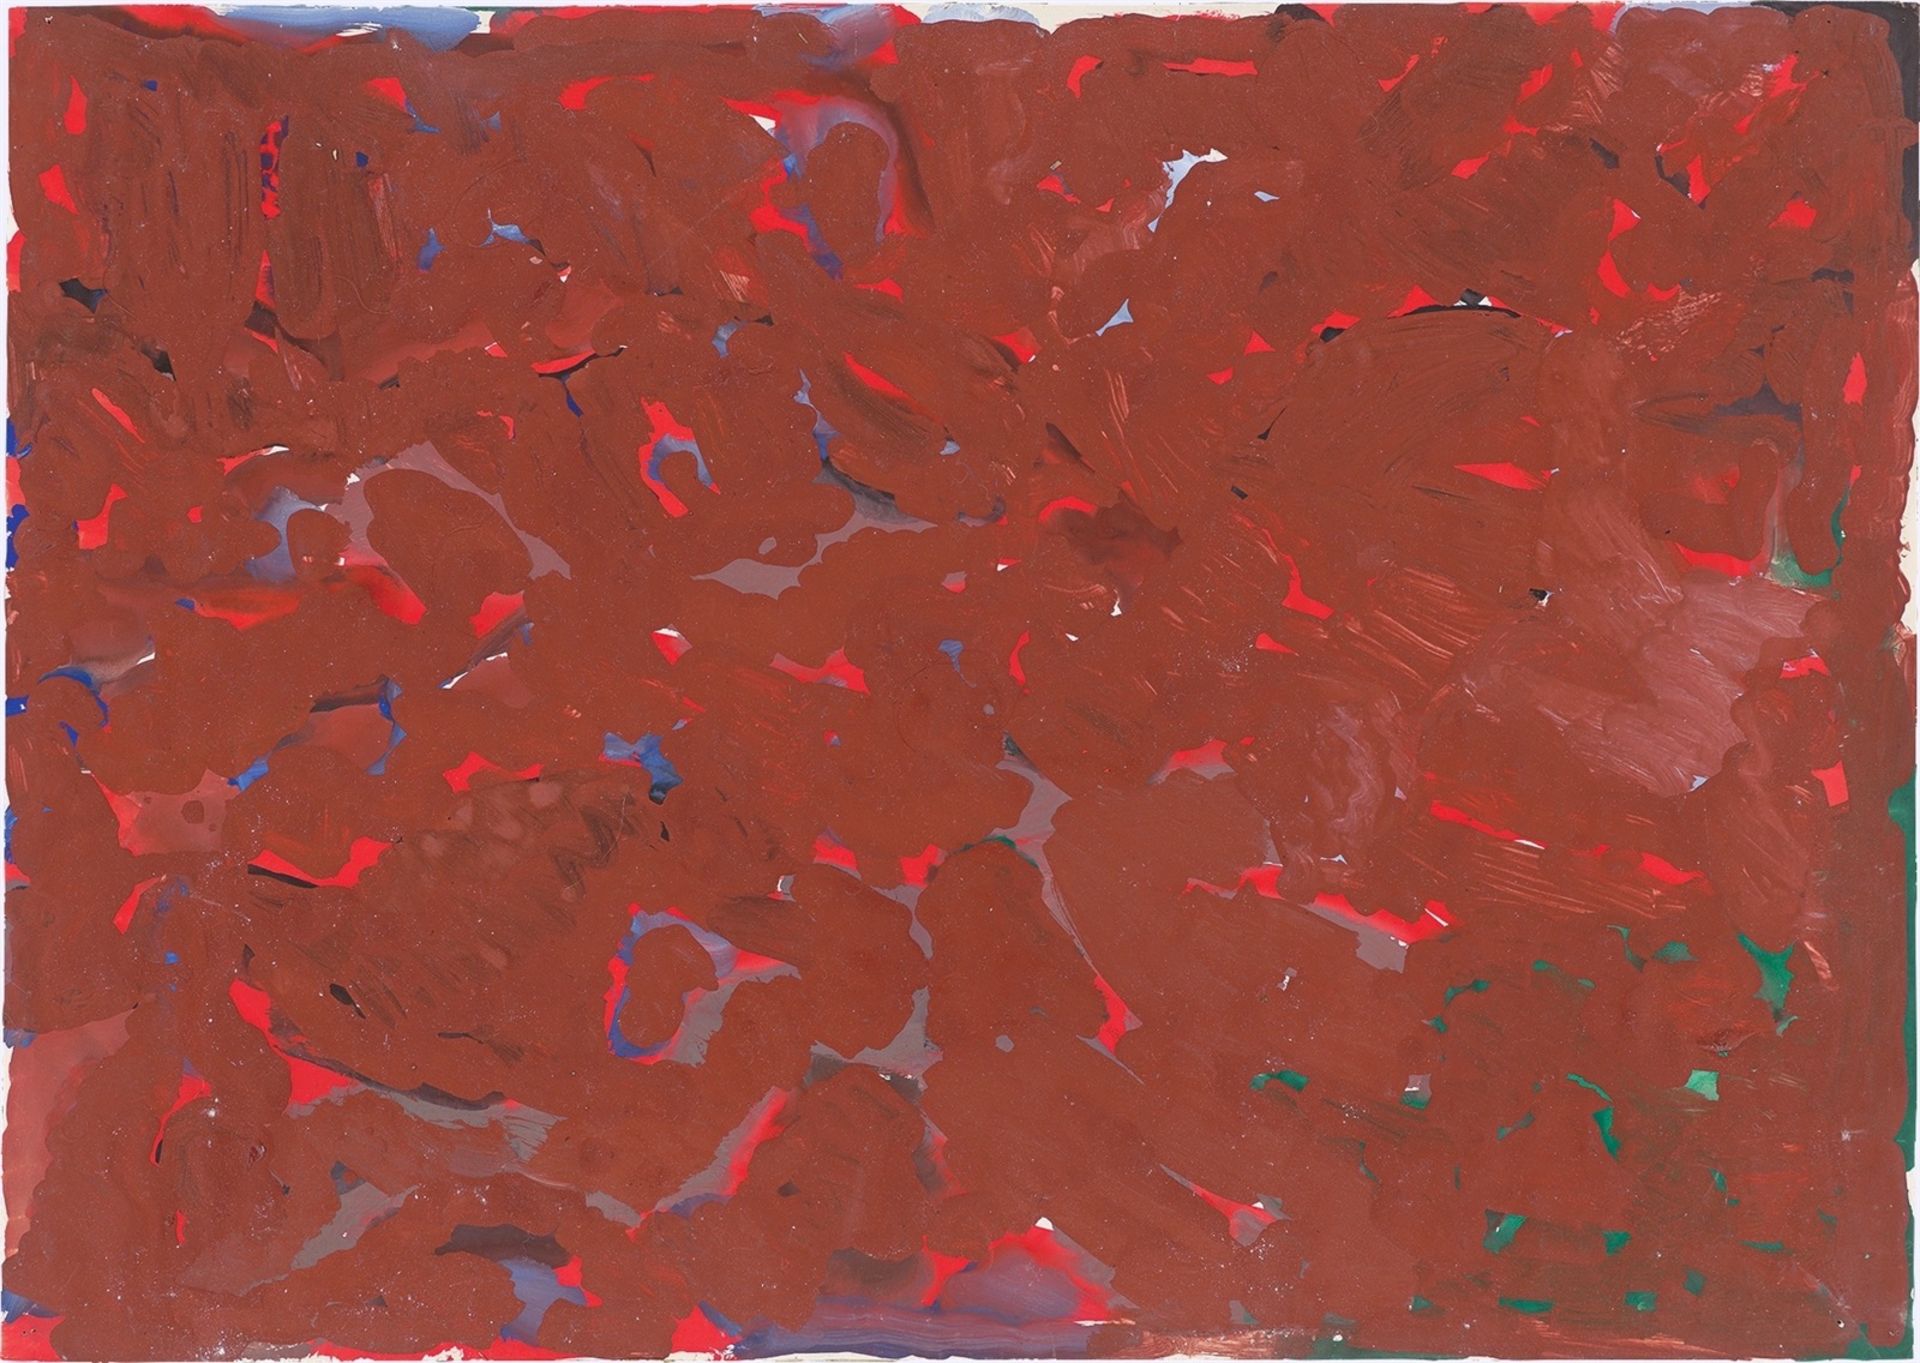 A.R. Penck. Untitled. 1975/76 - Image 10 of 10